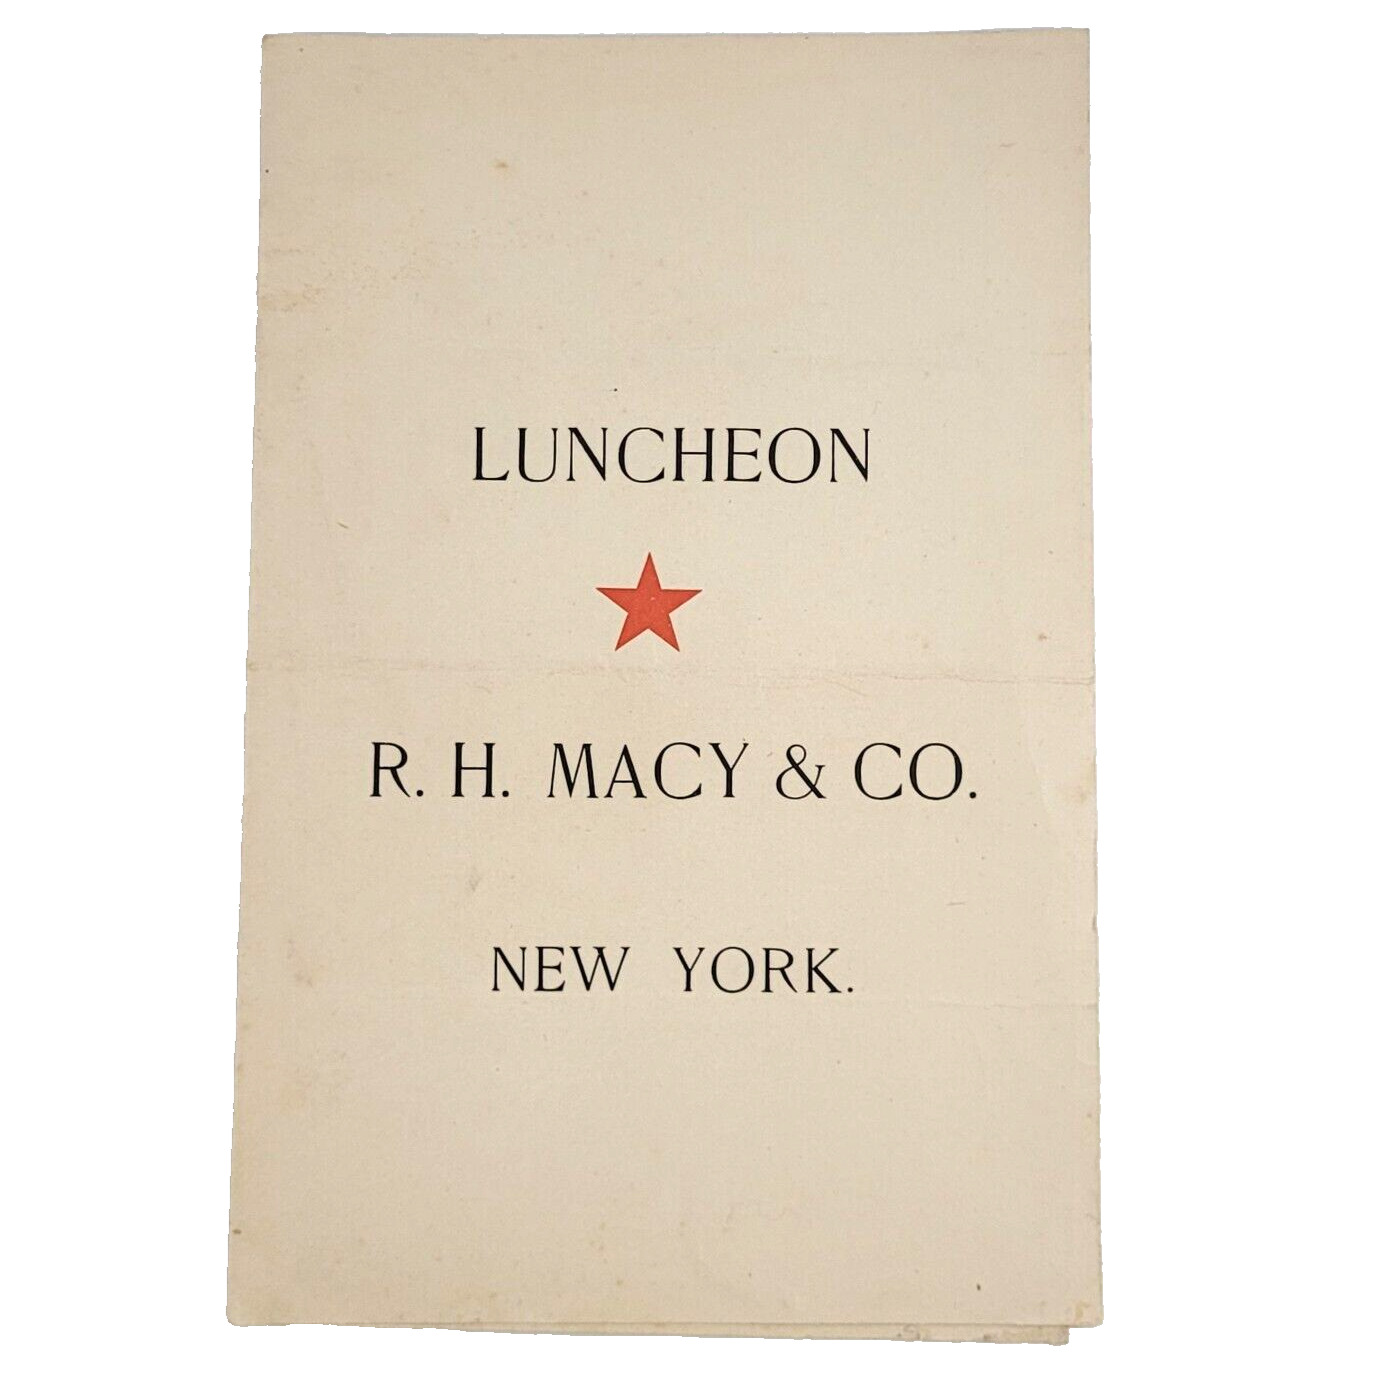 RARE c.1905 R.H. Macy & Co. Macy's NY Lunch Counter Menu Hand-Written Oyster VTG